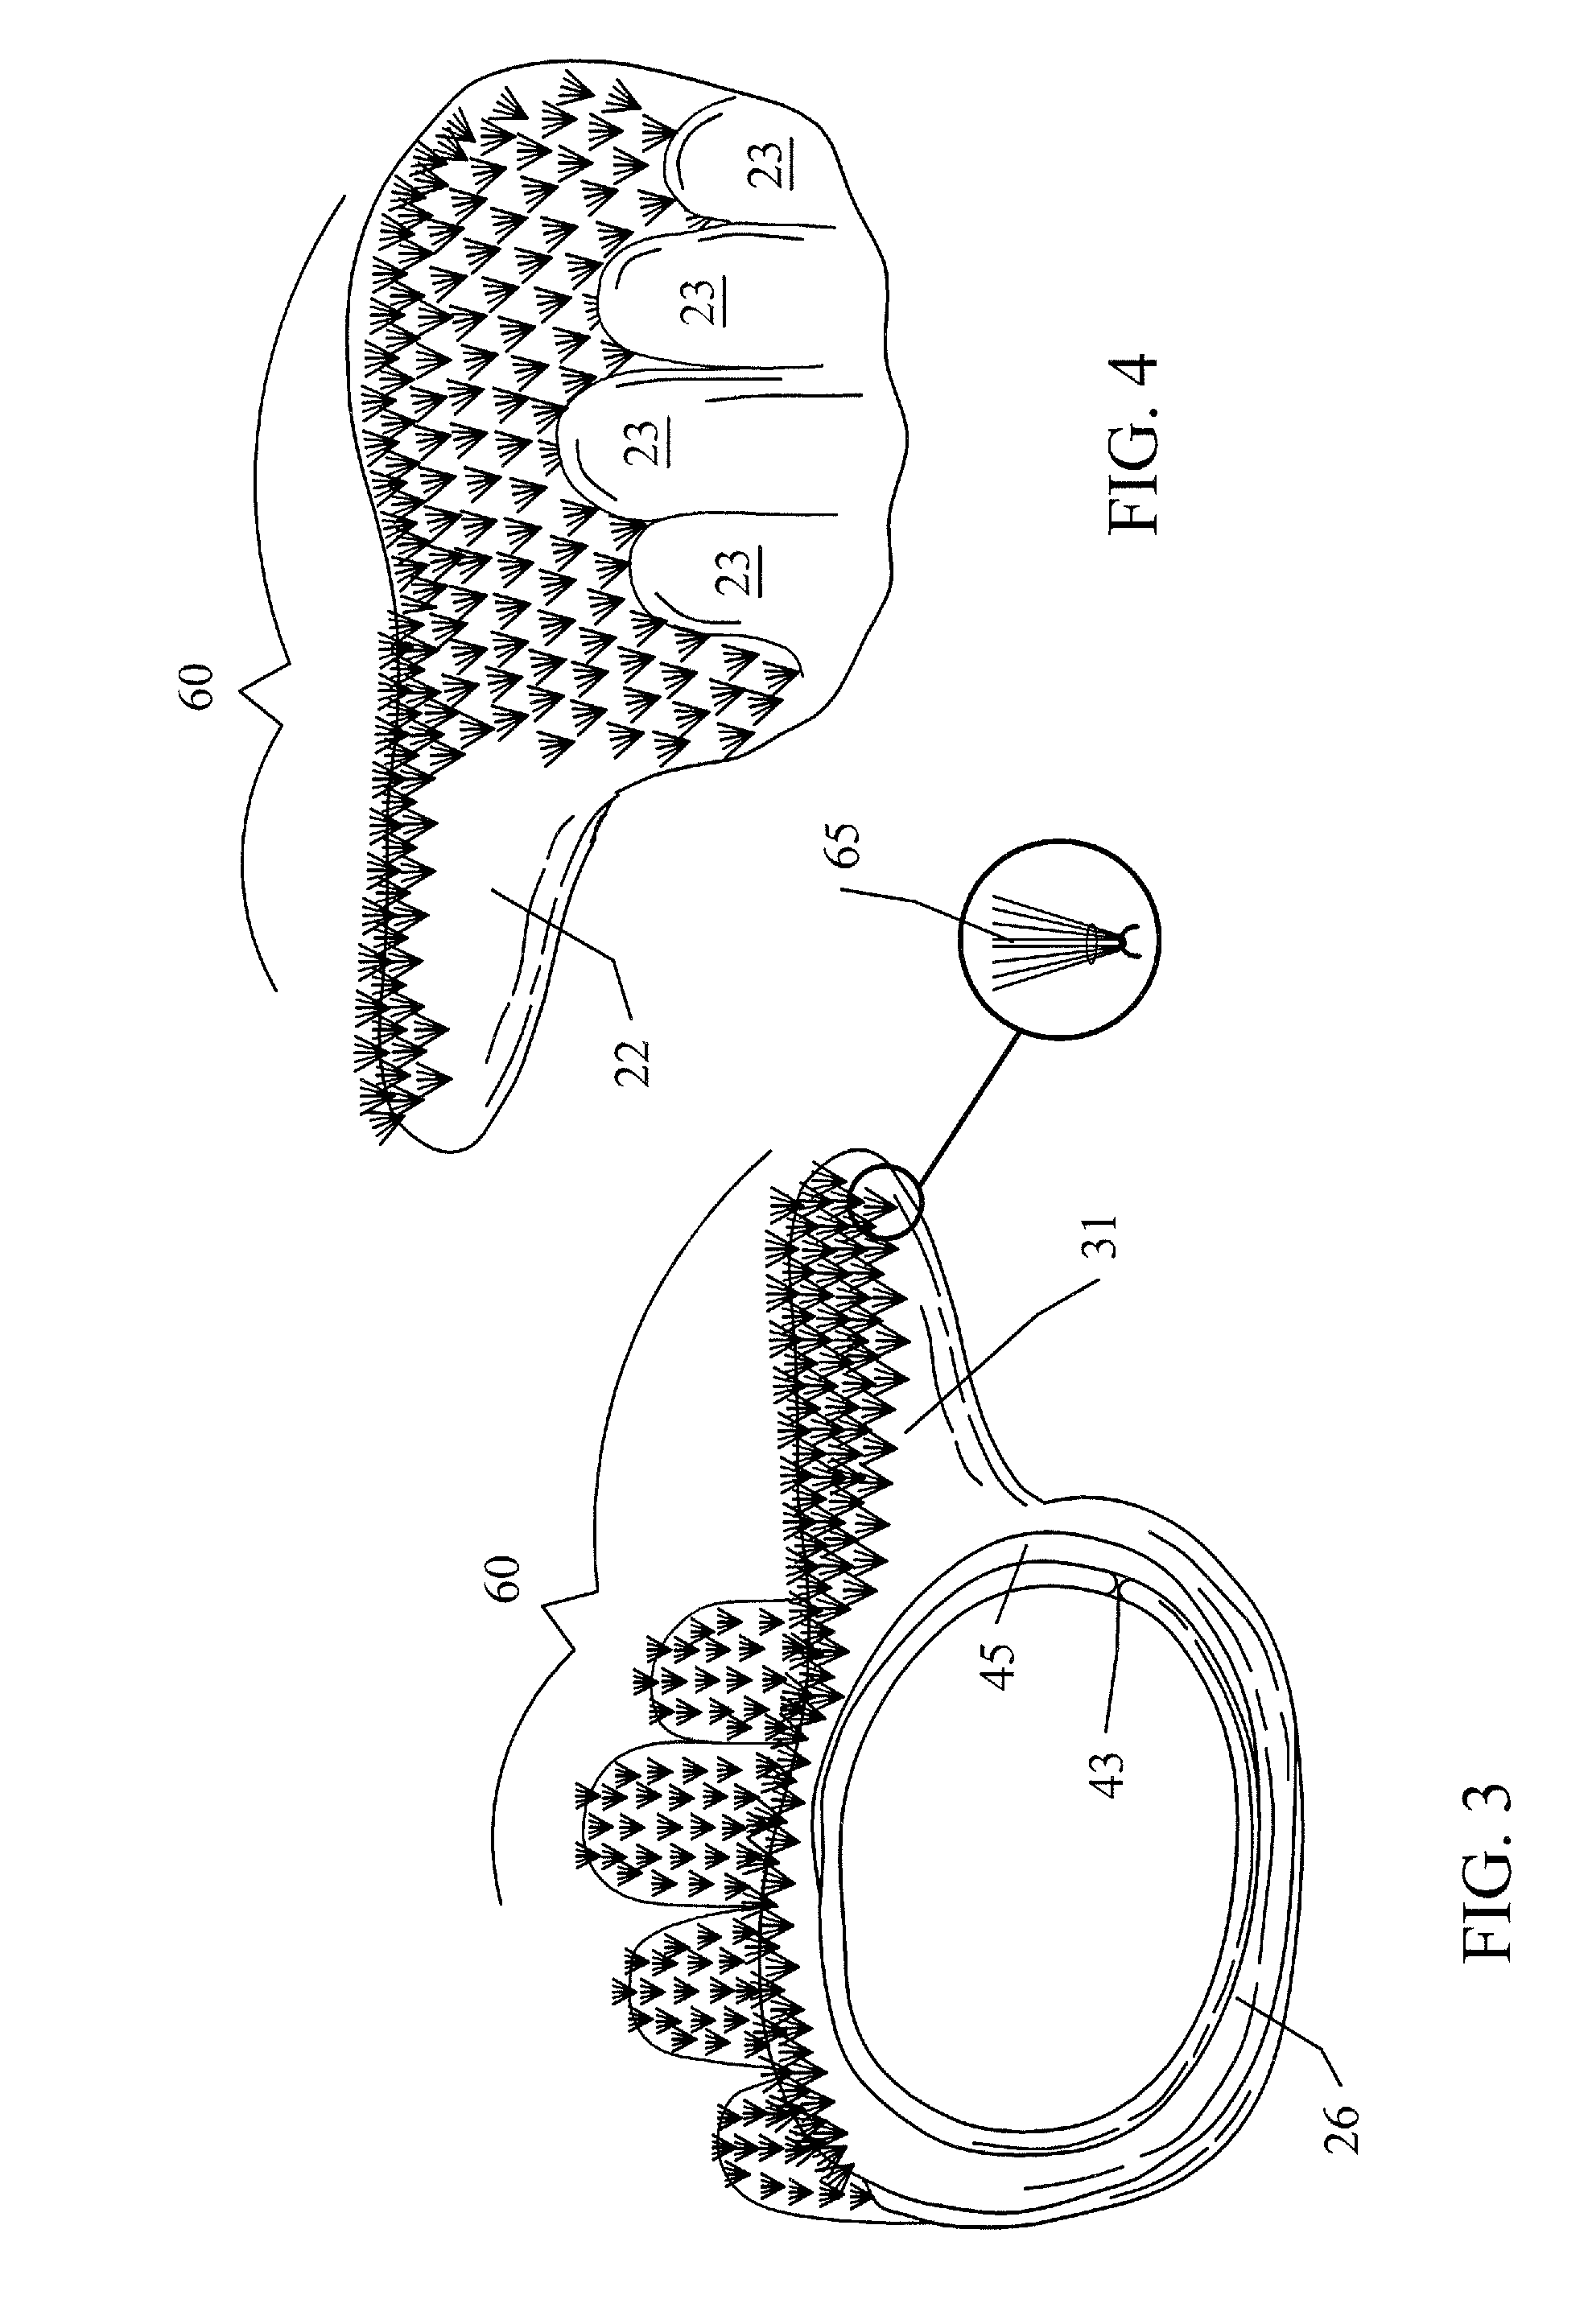 Hand brush and methods of use